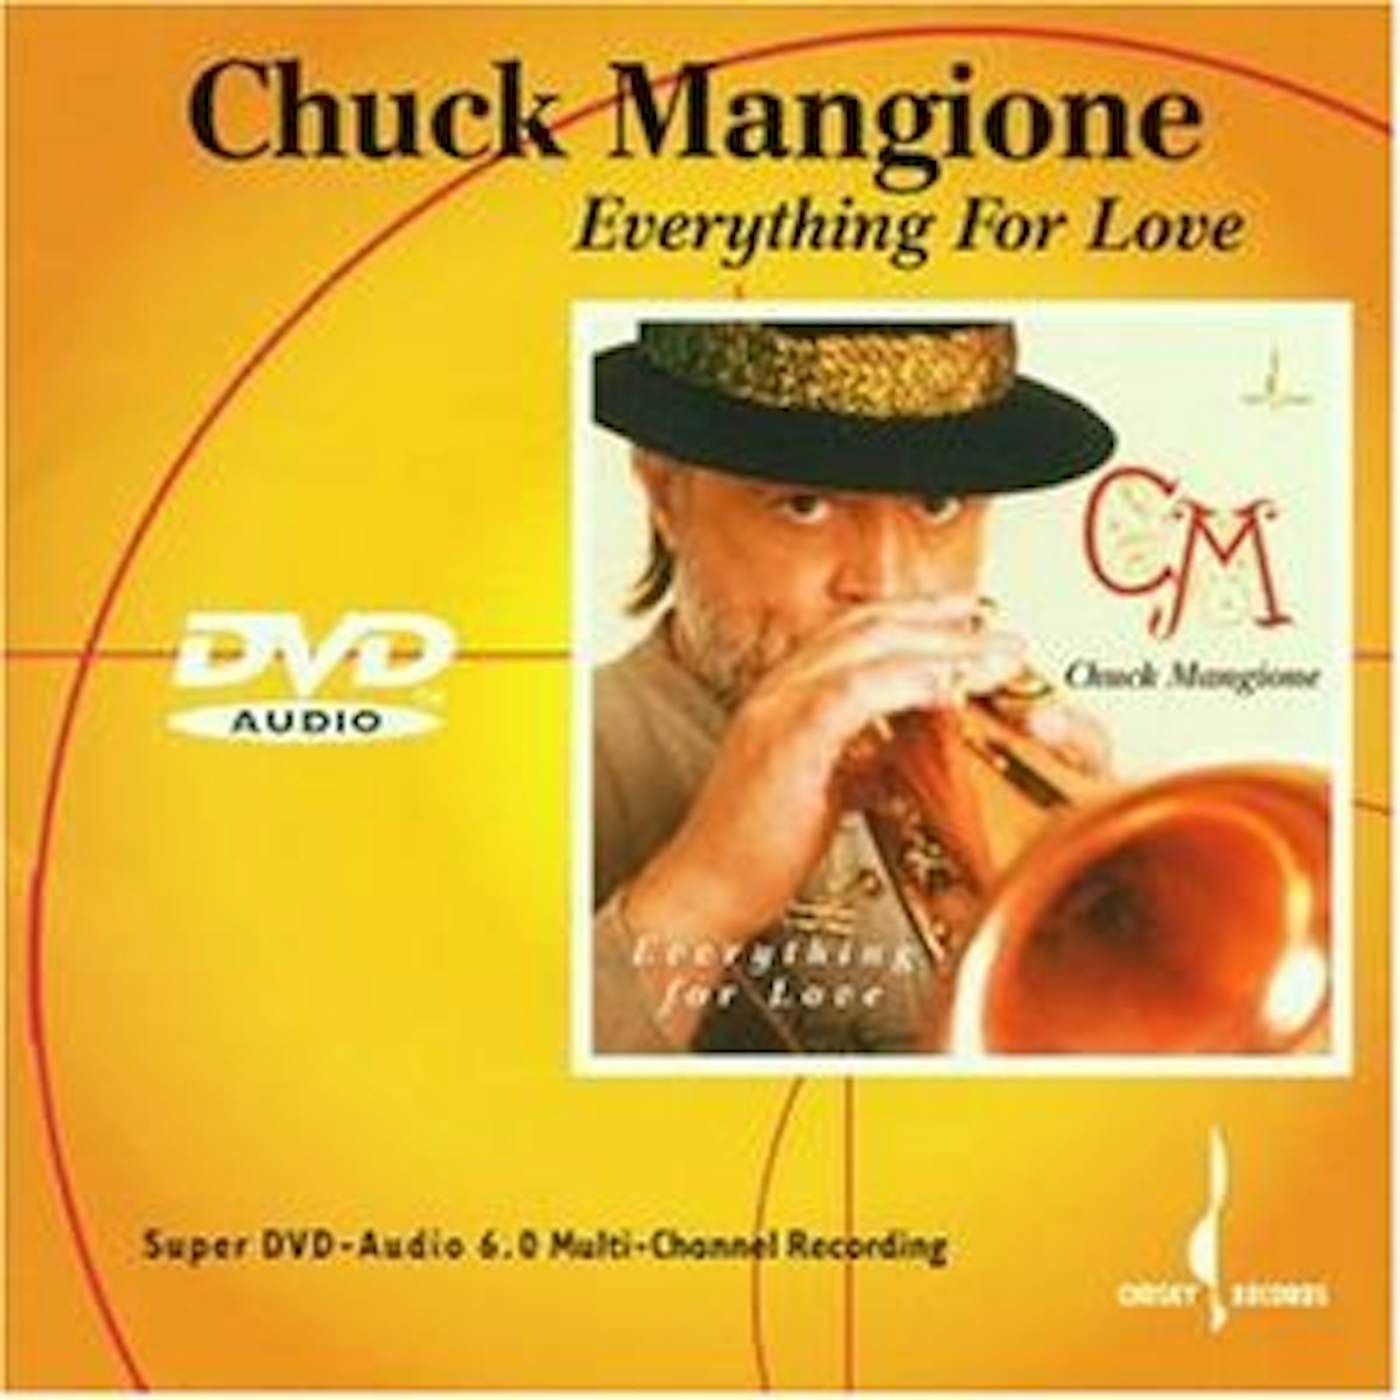 Chuck Mangione EVERYTHING FOR LOVE DVD